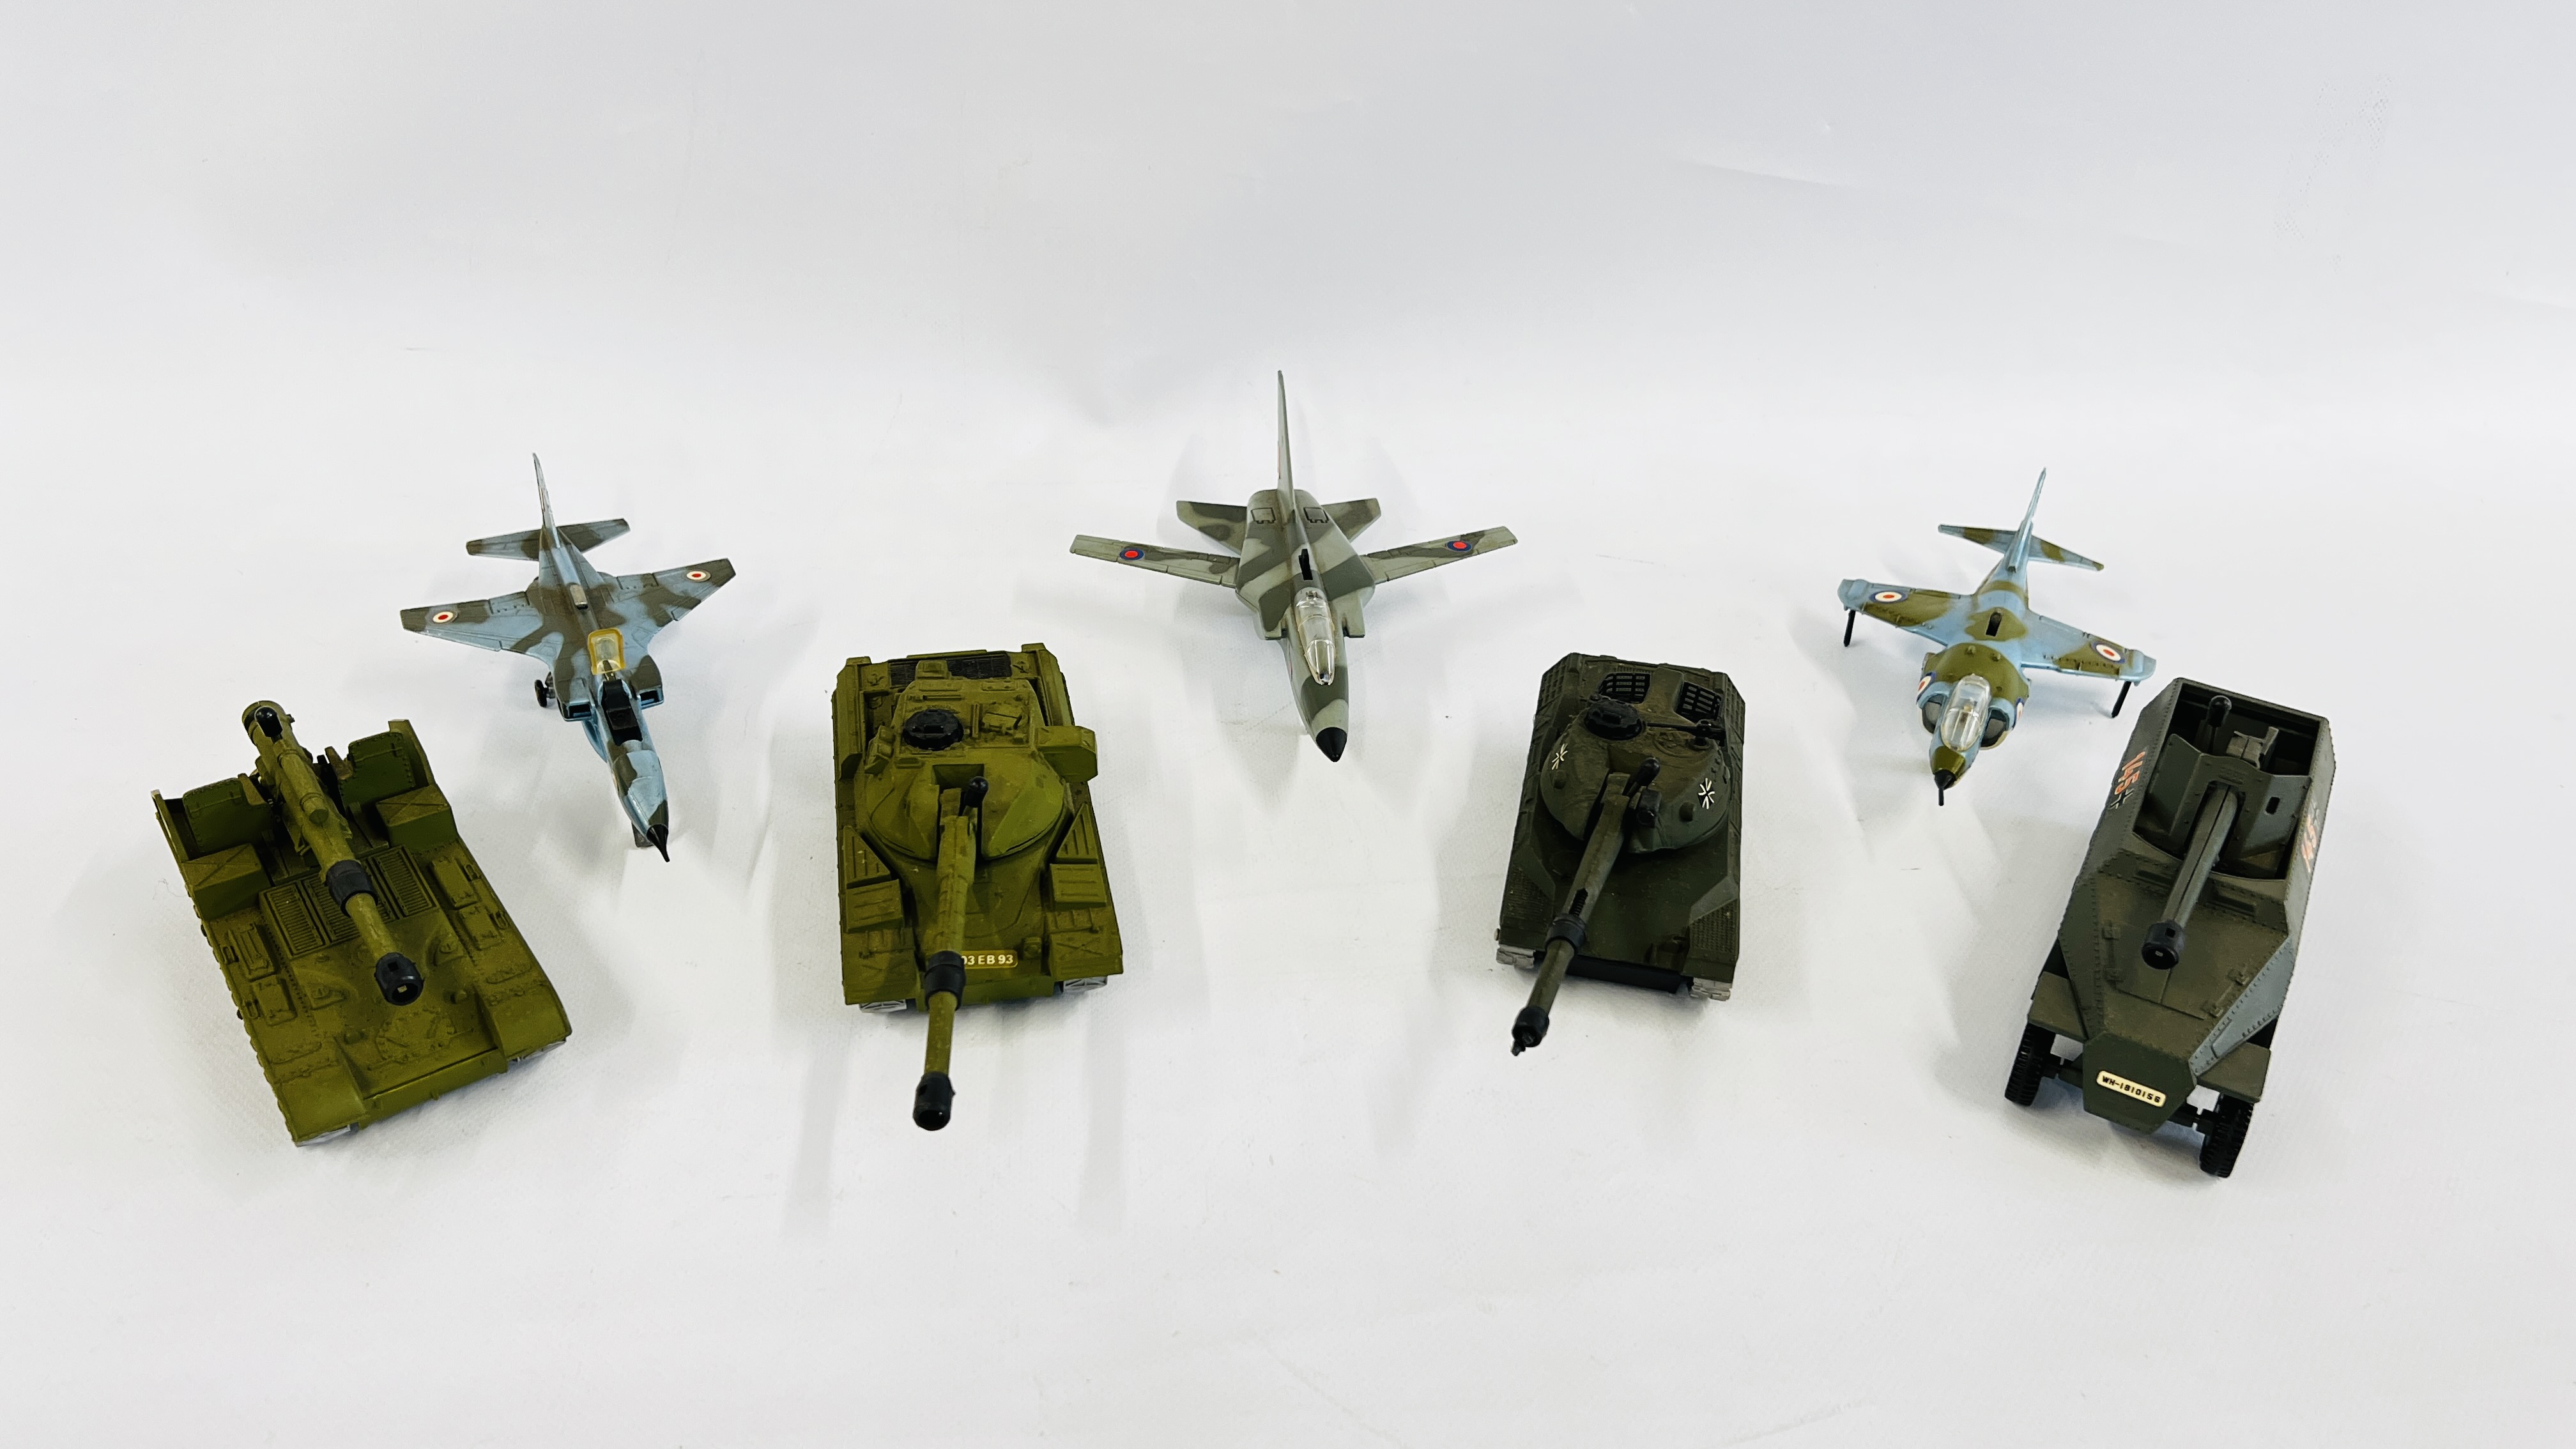 A GROUP OF 4 X DIE-CAST MILITARY DINKY TANKS ALONG WITH 4 X DIE-CAST DINKY FIGHTER PLANES / JETS.